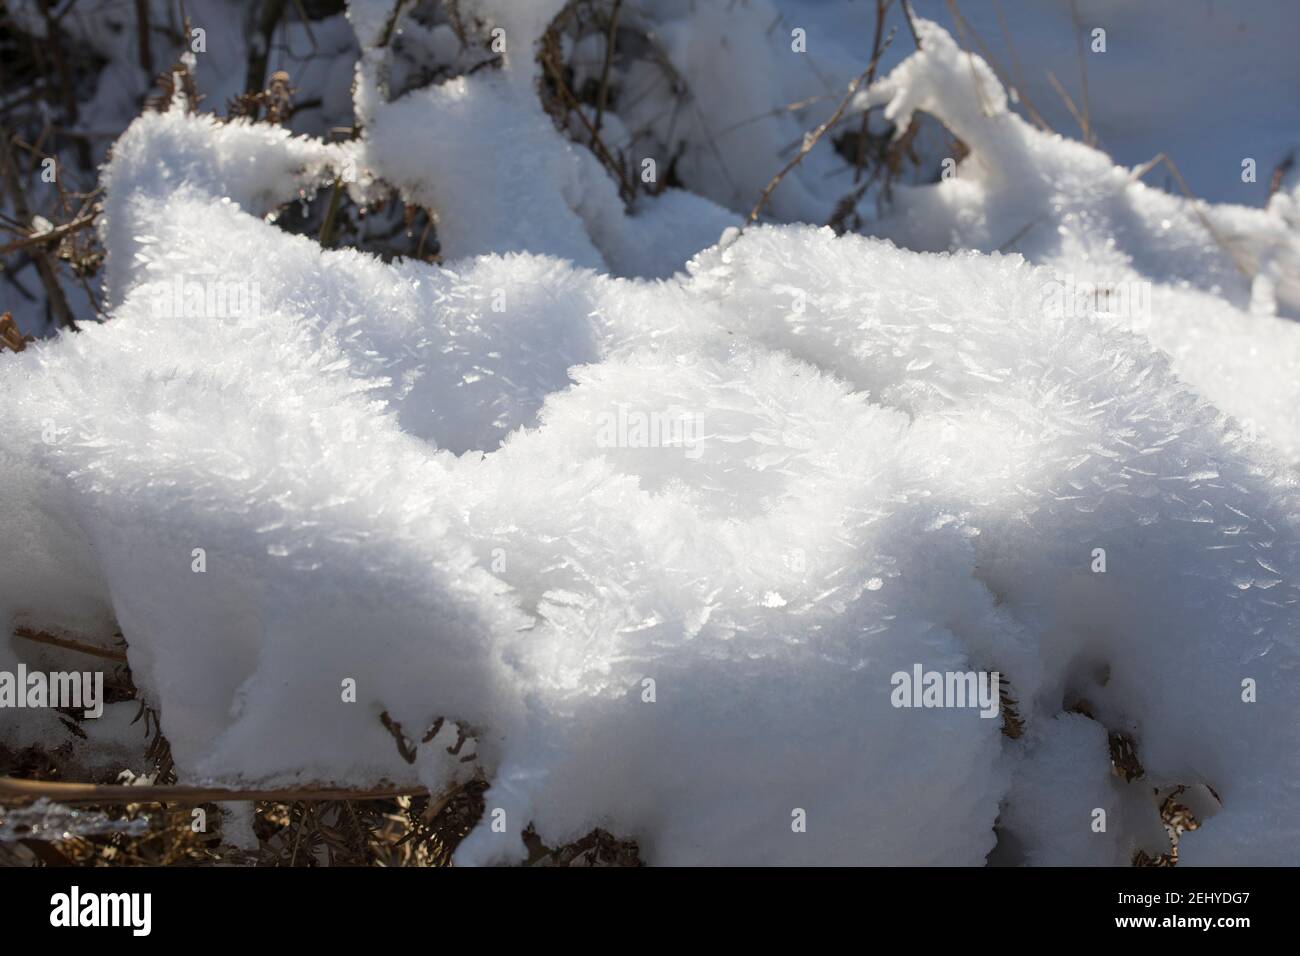 Snow chrystals formed by drifting snow Stock Photo